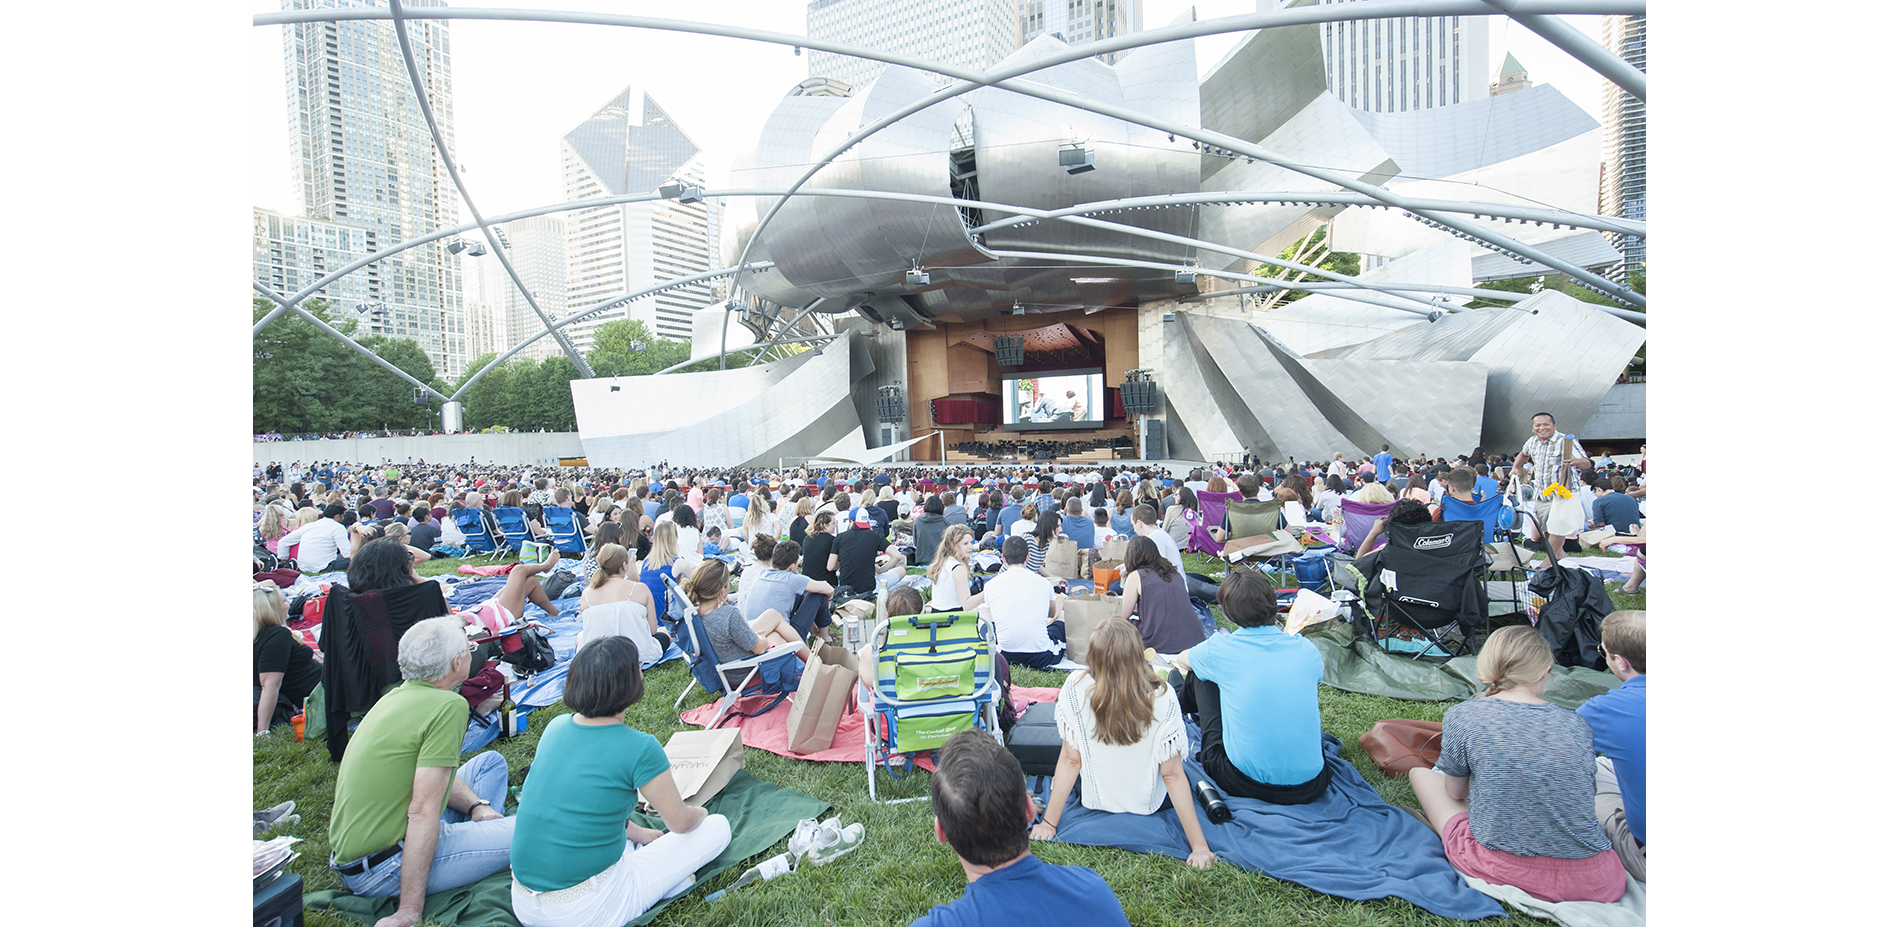 Frank Gehry's Jay Pritzker Pavilion and Great Lawn